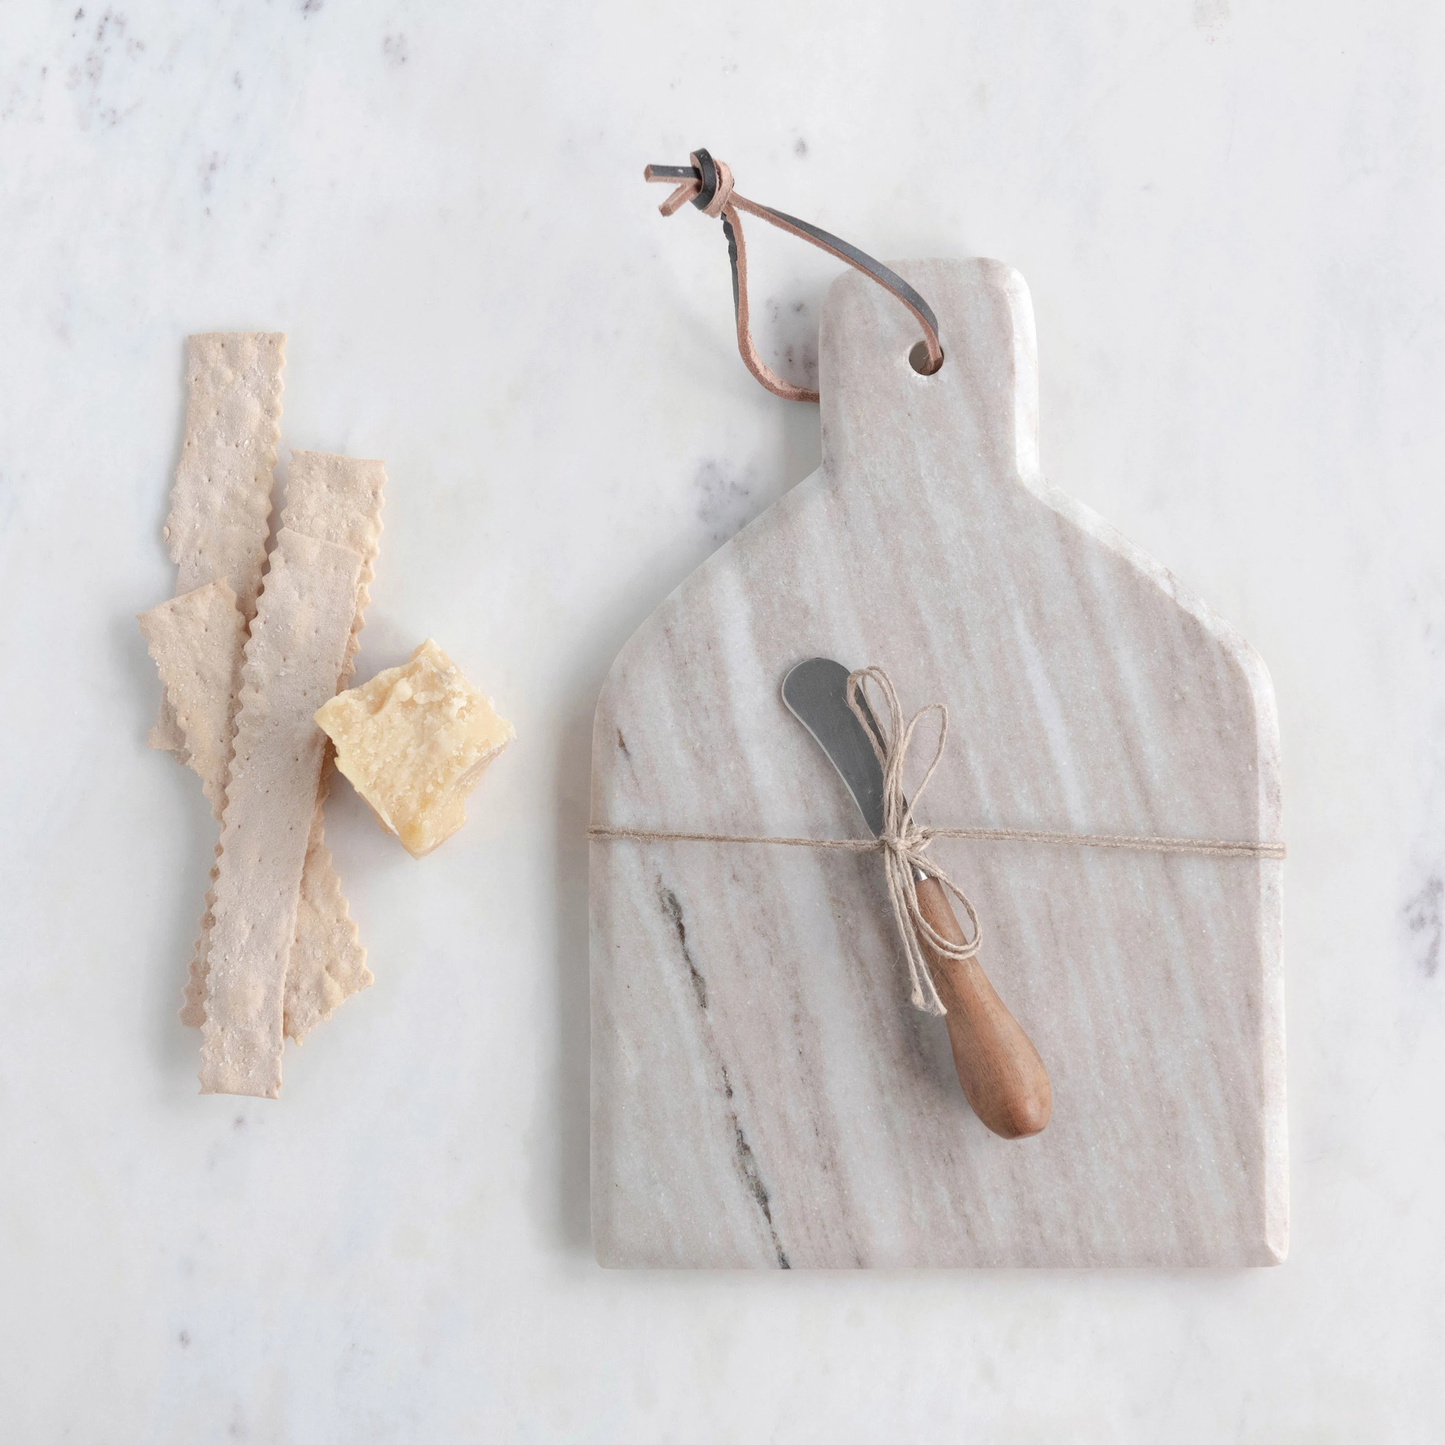 Cheese/Cutting Board with Canape Knife, Set of 2 - Curated Home Decor